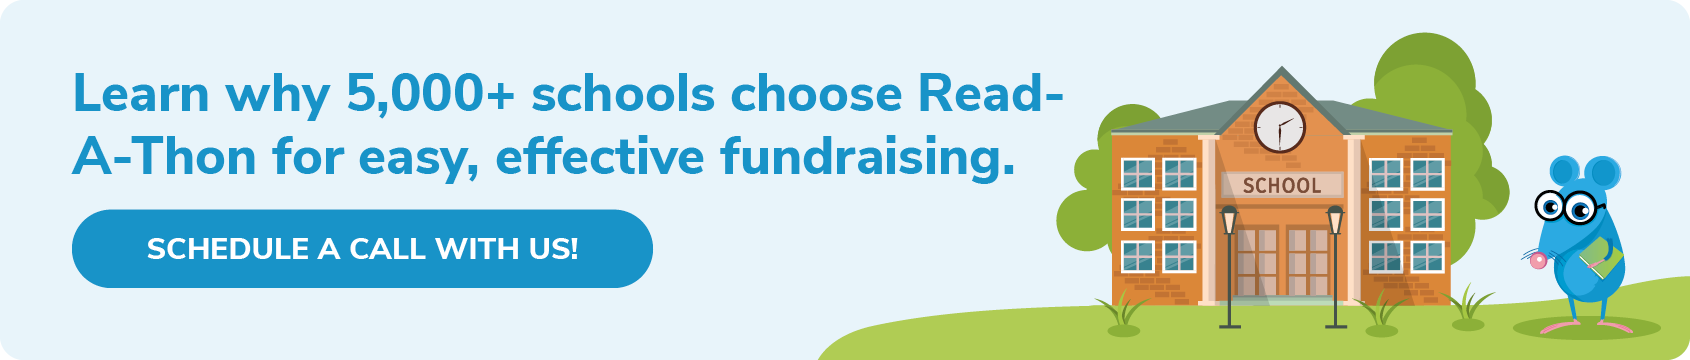 Schedule a call with the Read-A-Thon team to learn how you can launch a Read-A-Thon, one of the top PTA fundraising ideas to support student learning.